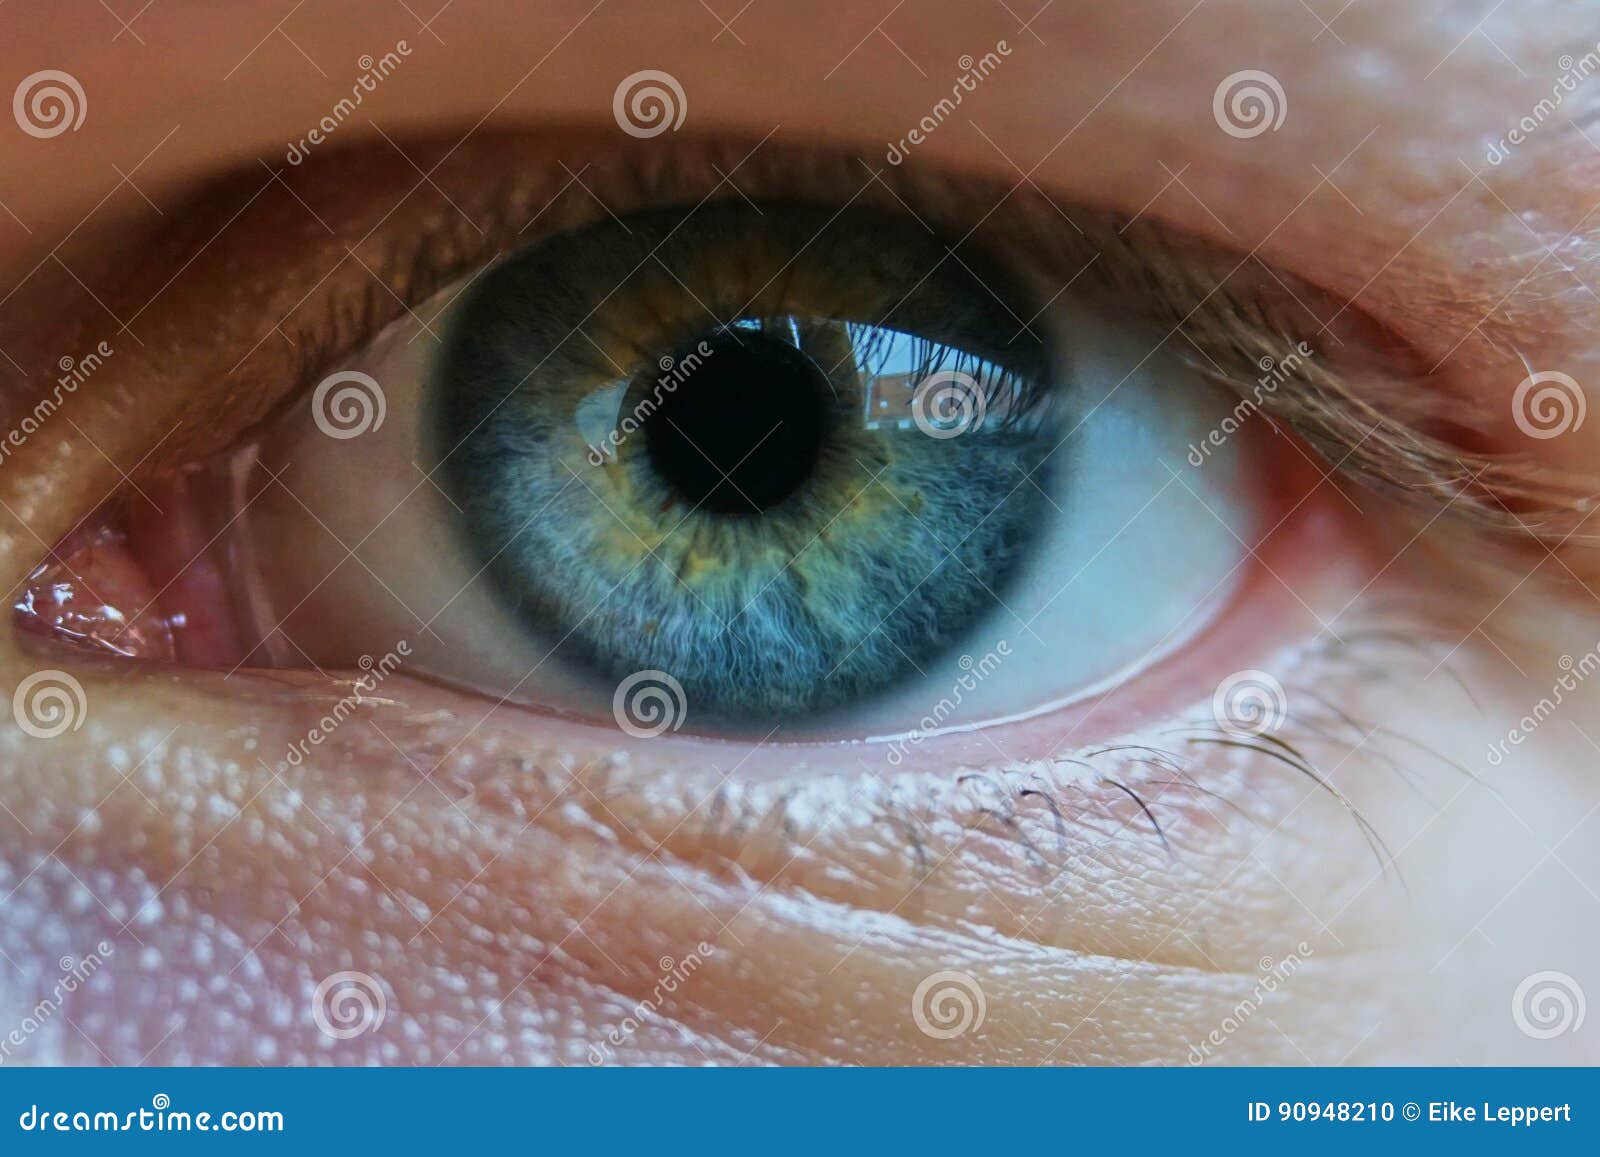 close up of a mans blue eyes, extrem macro. reflection of a buildingin the eye.